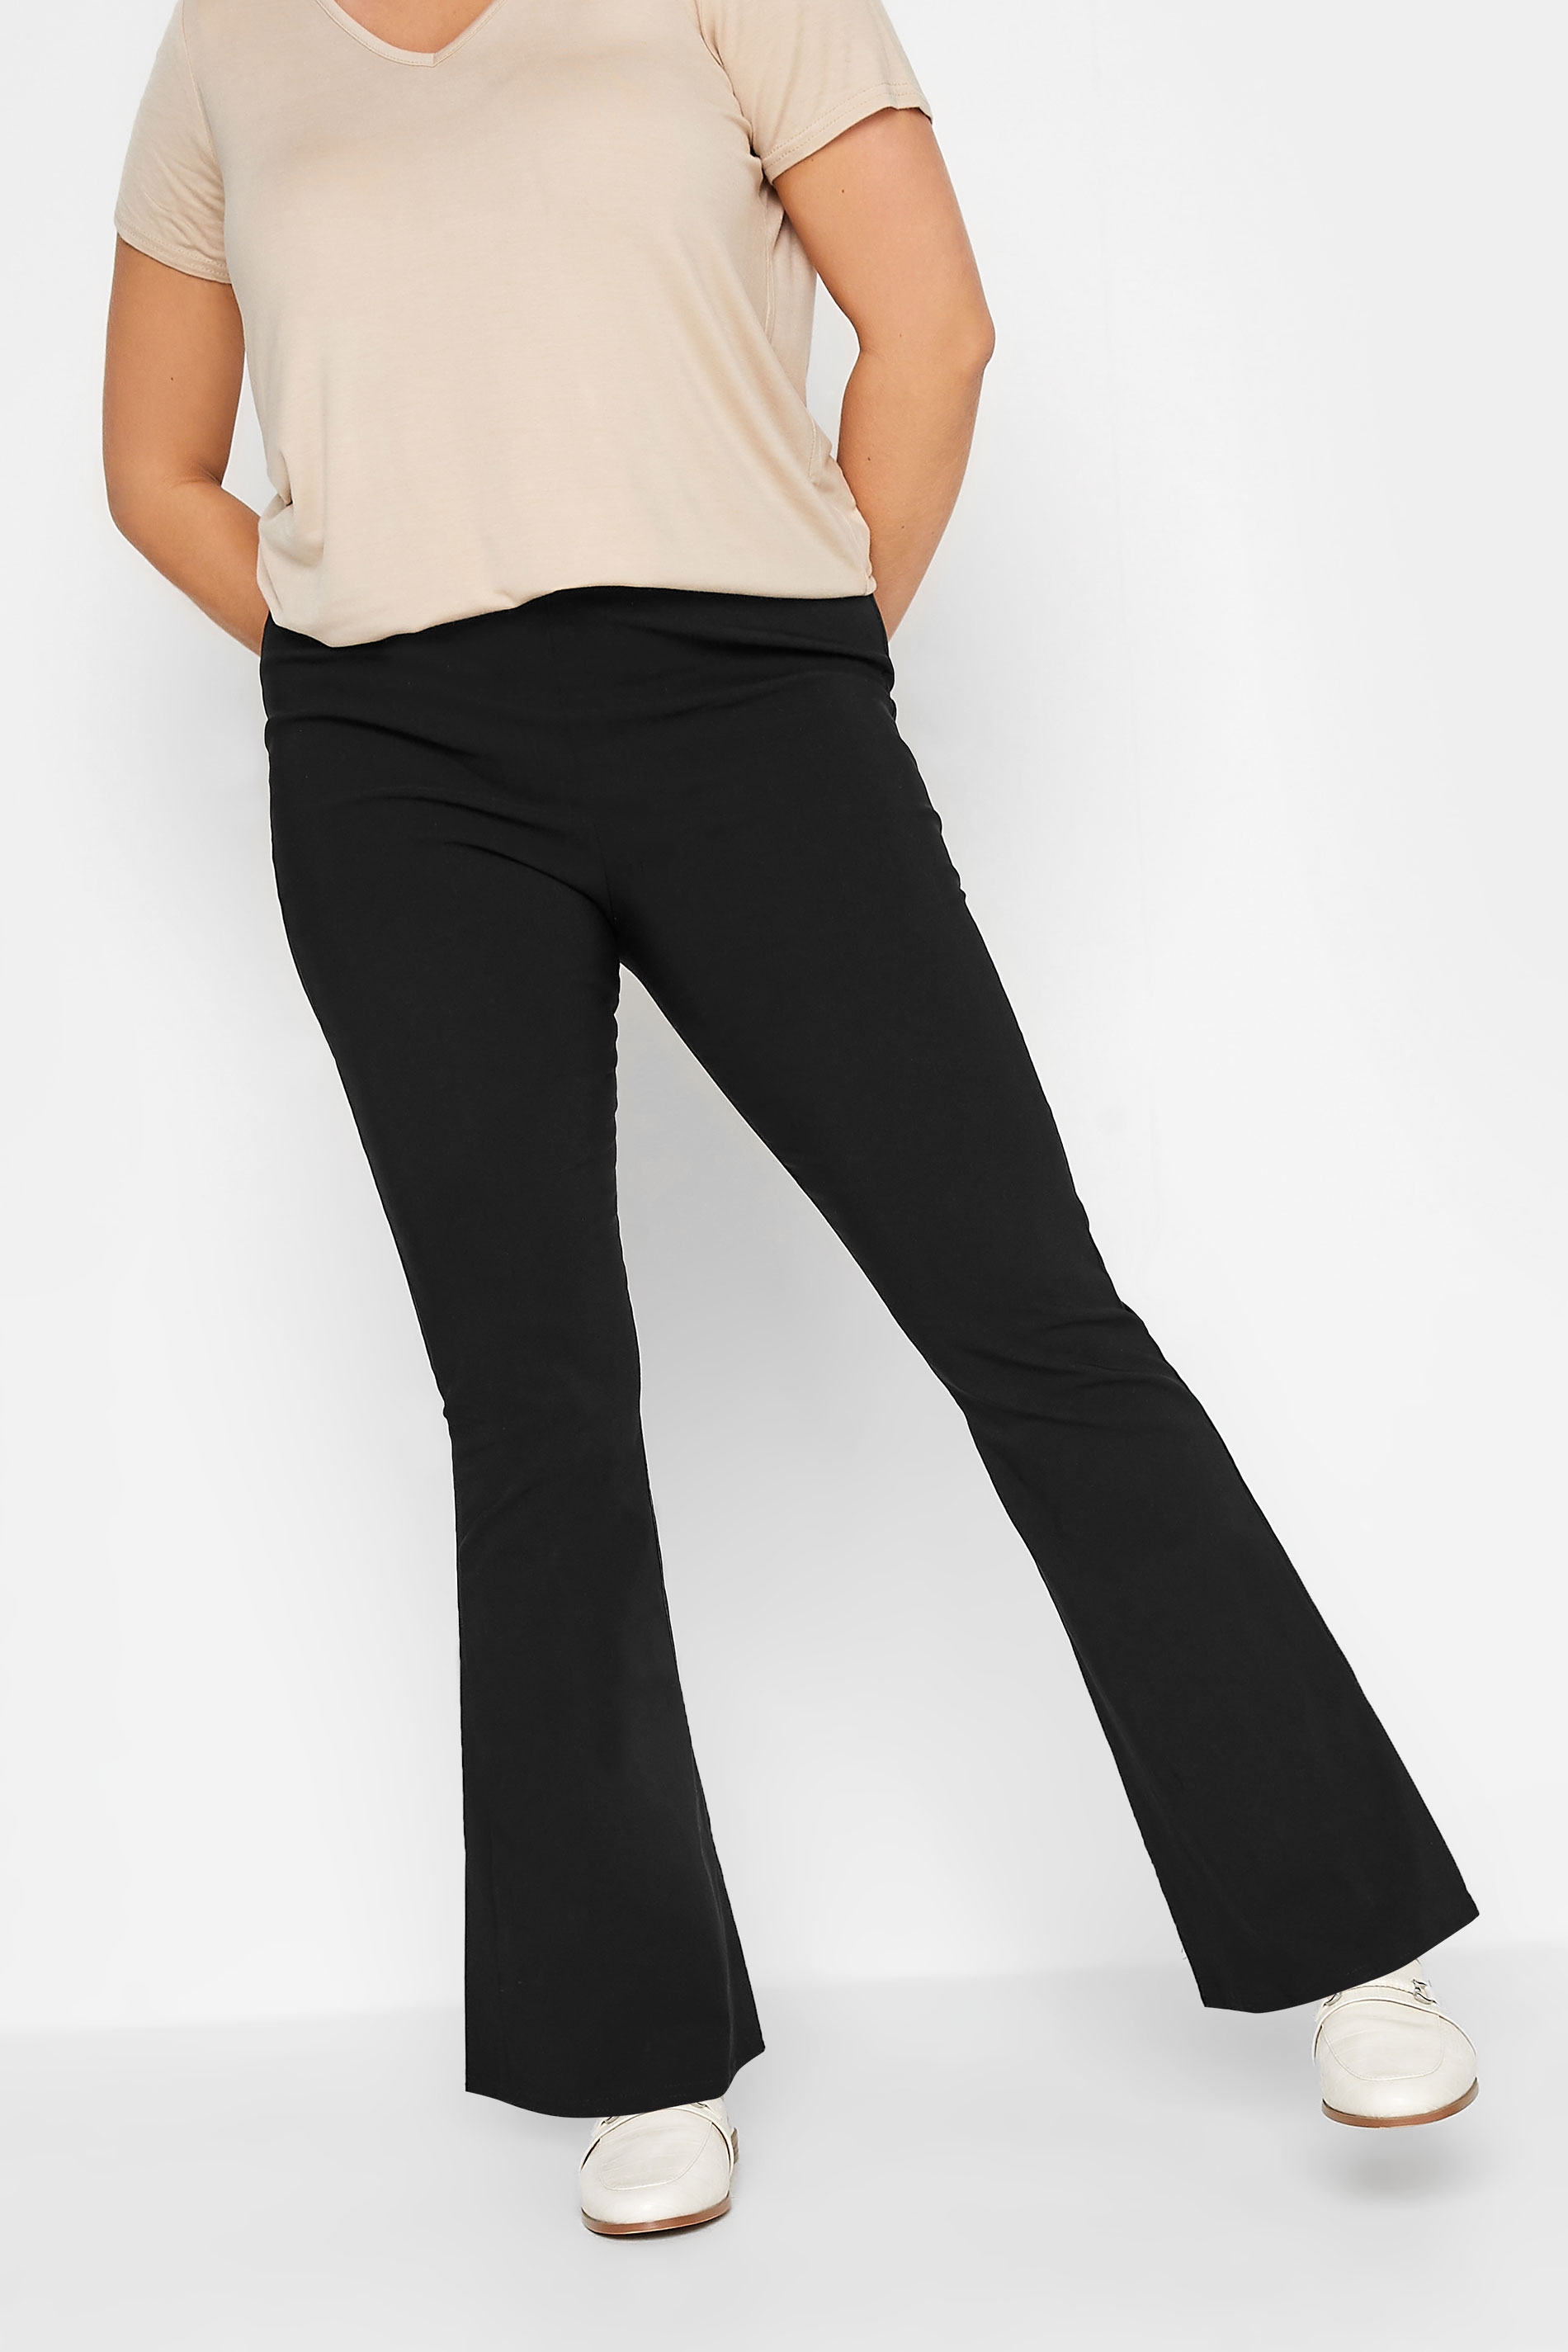 YOURS Curve Plus Size Black Flare Bengaline Trousers | Yours Clothing  1